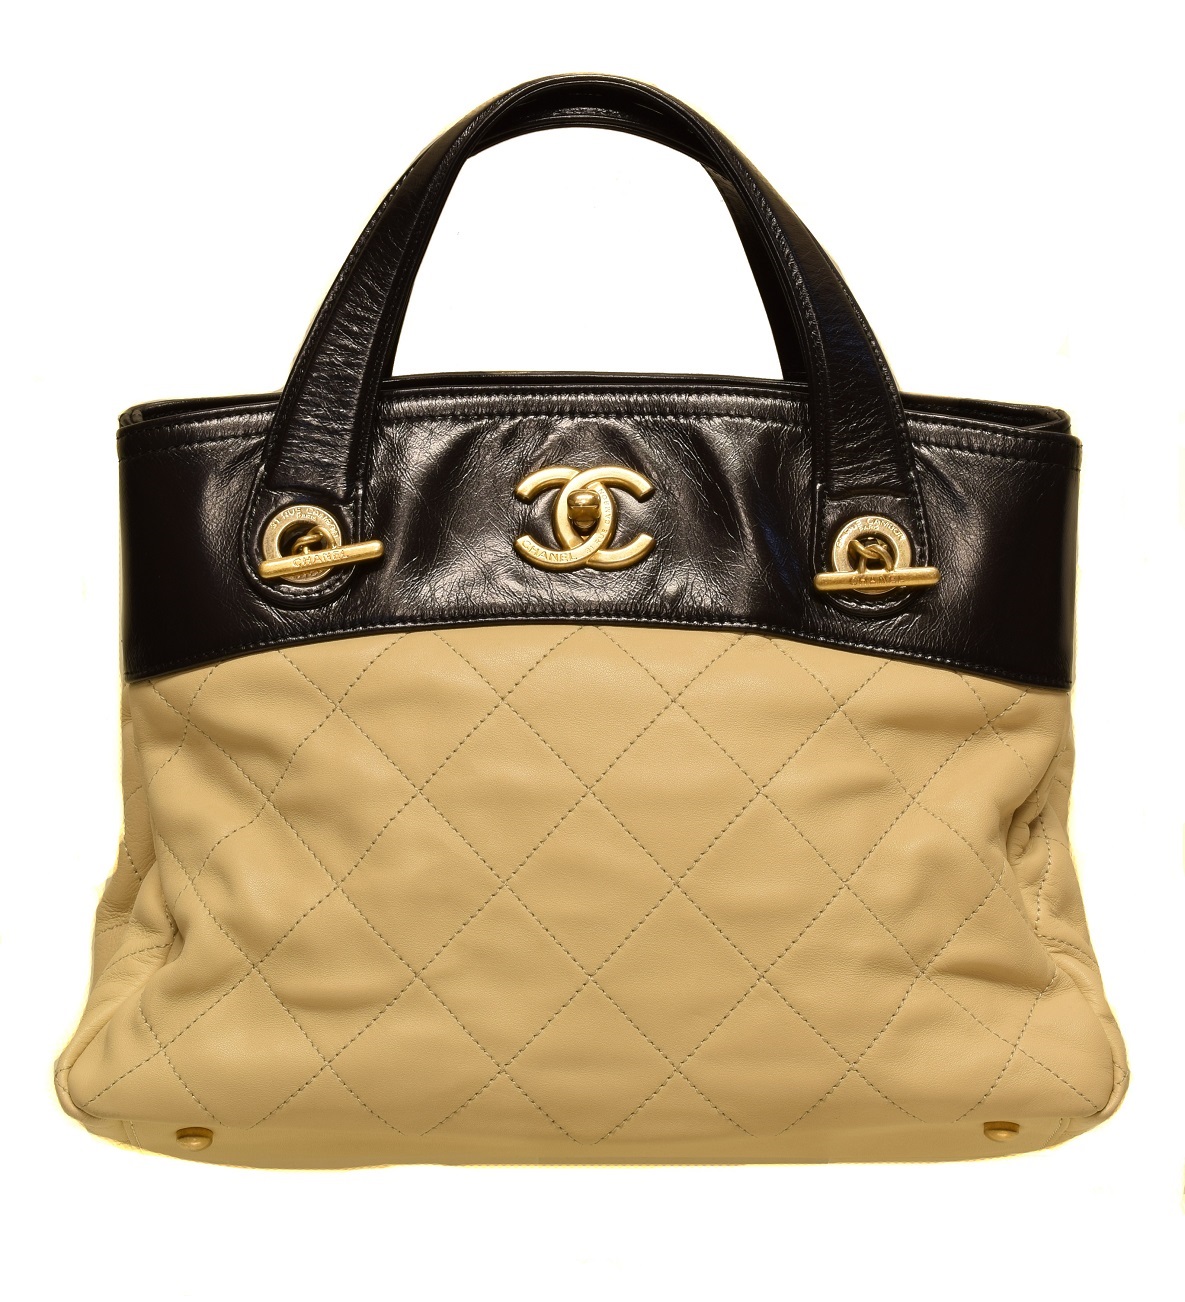 Chanel Beige Tweed Deauville Shopping Tote Bag  STYLISHTOP